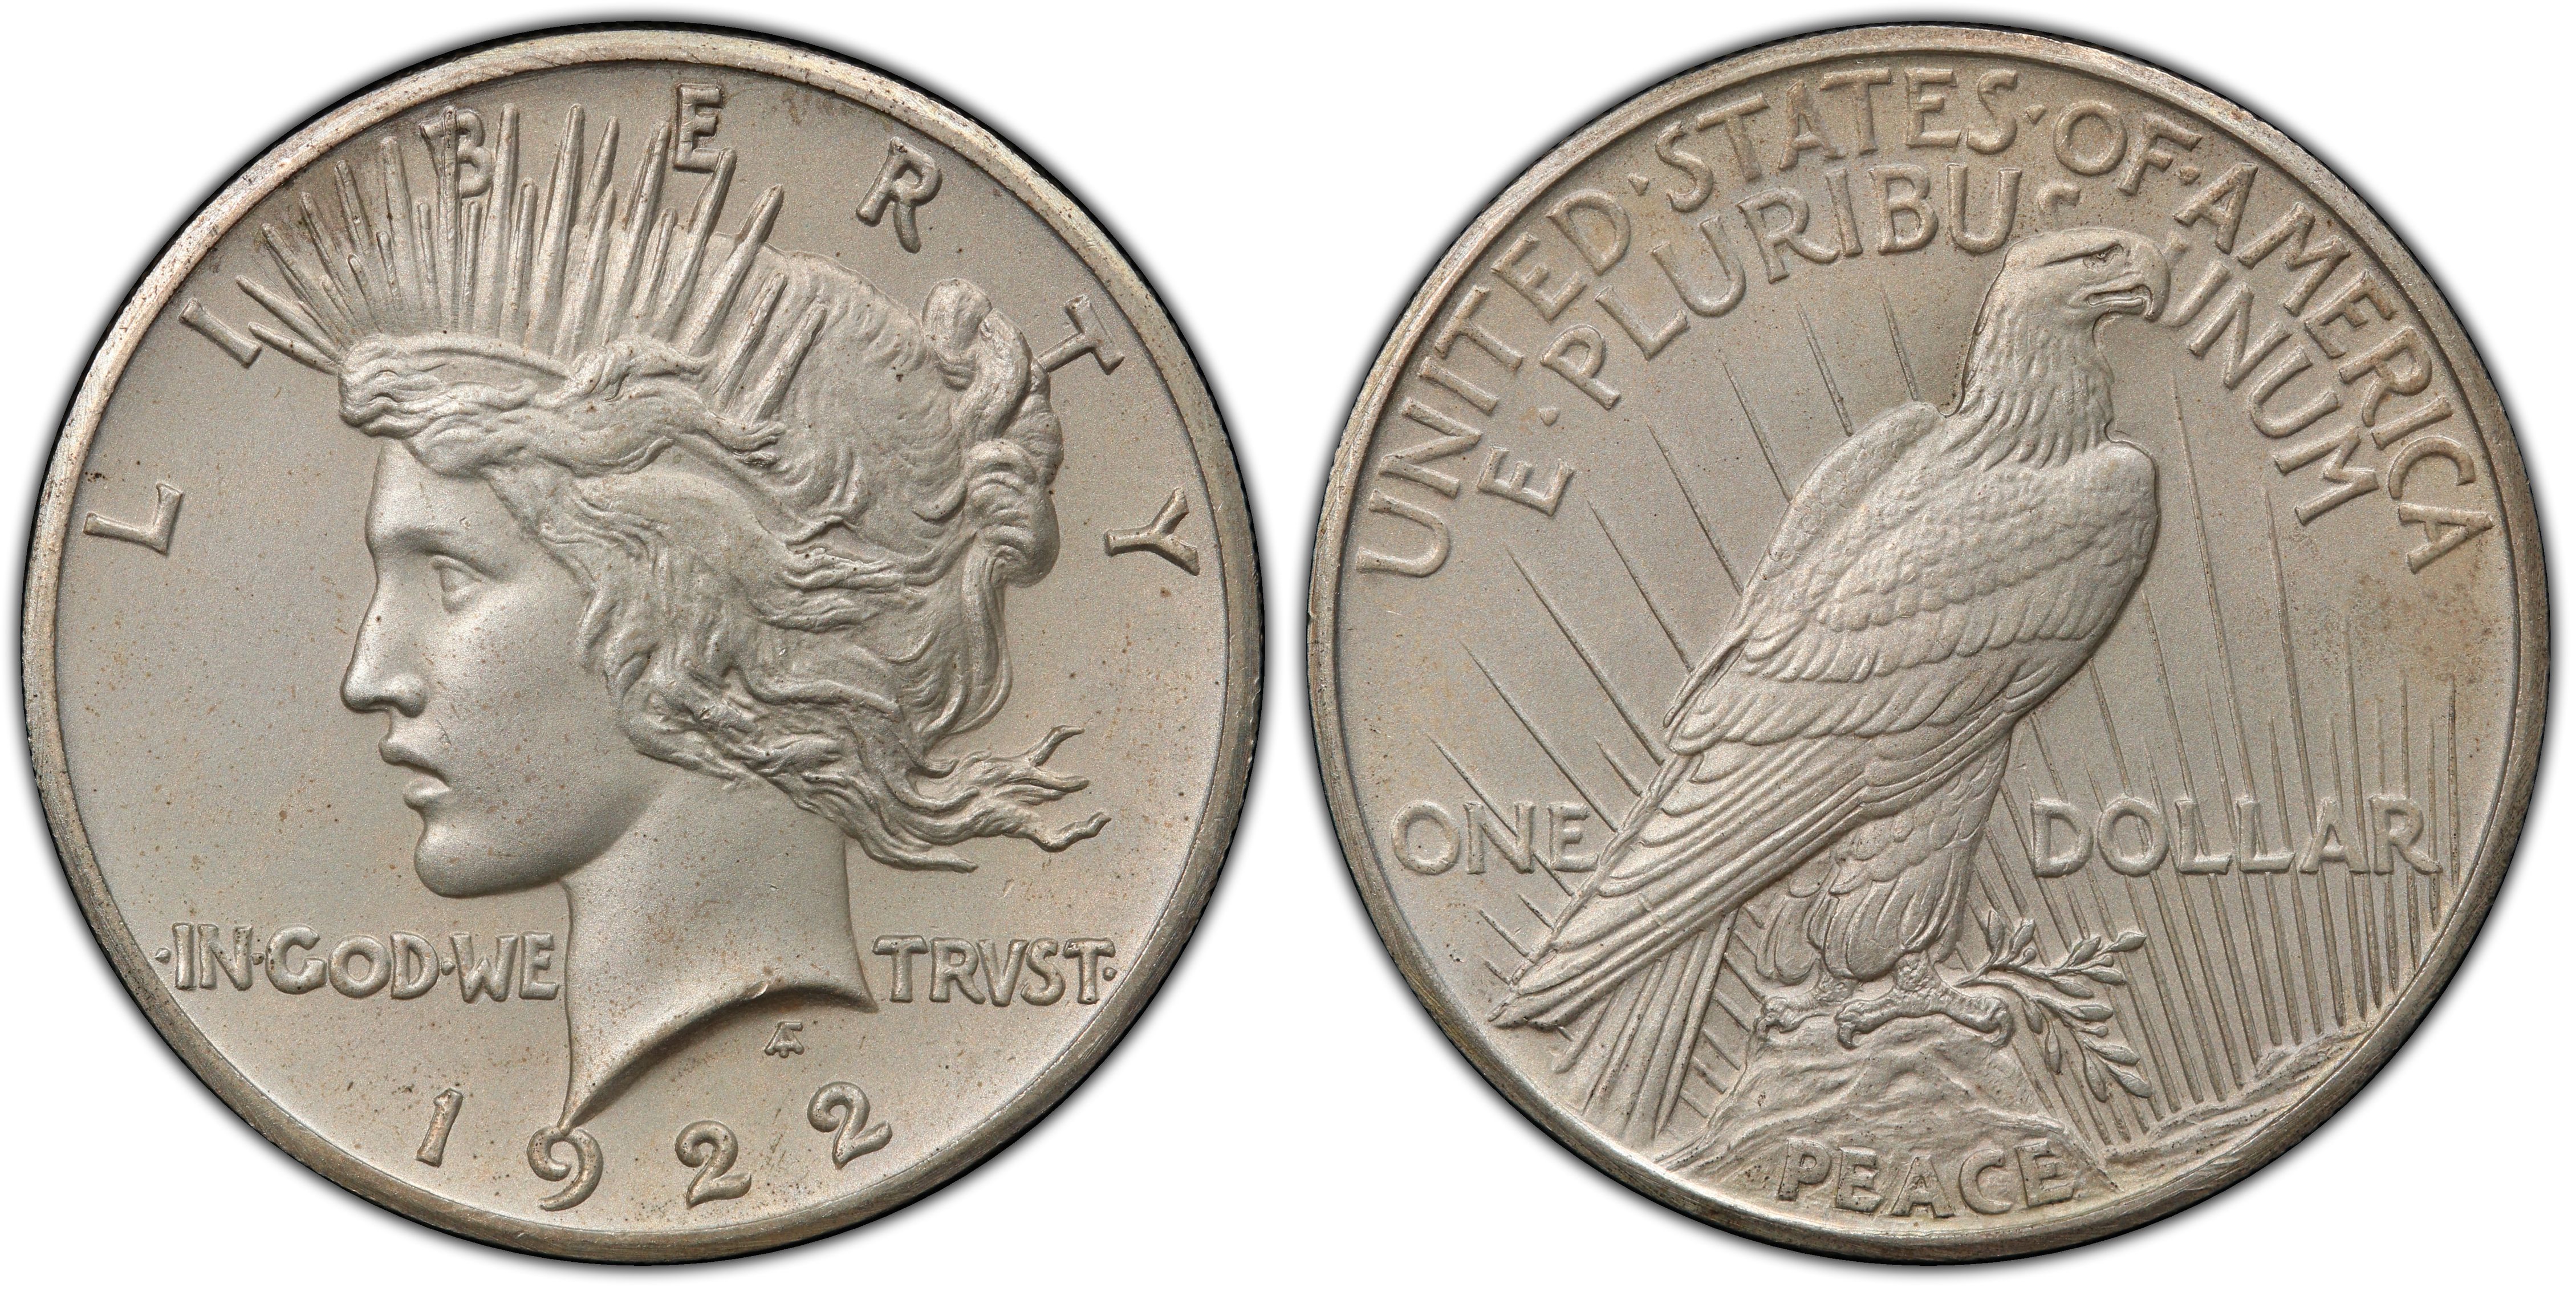 1922 $1 Matte Finish, High Relief (Proof) Peace Dollar - PCGS CoinFacts